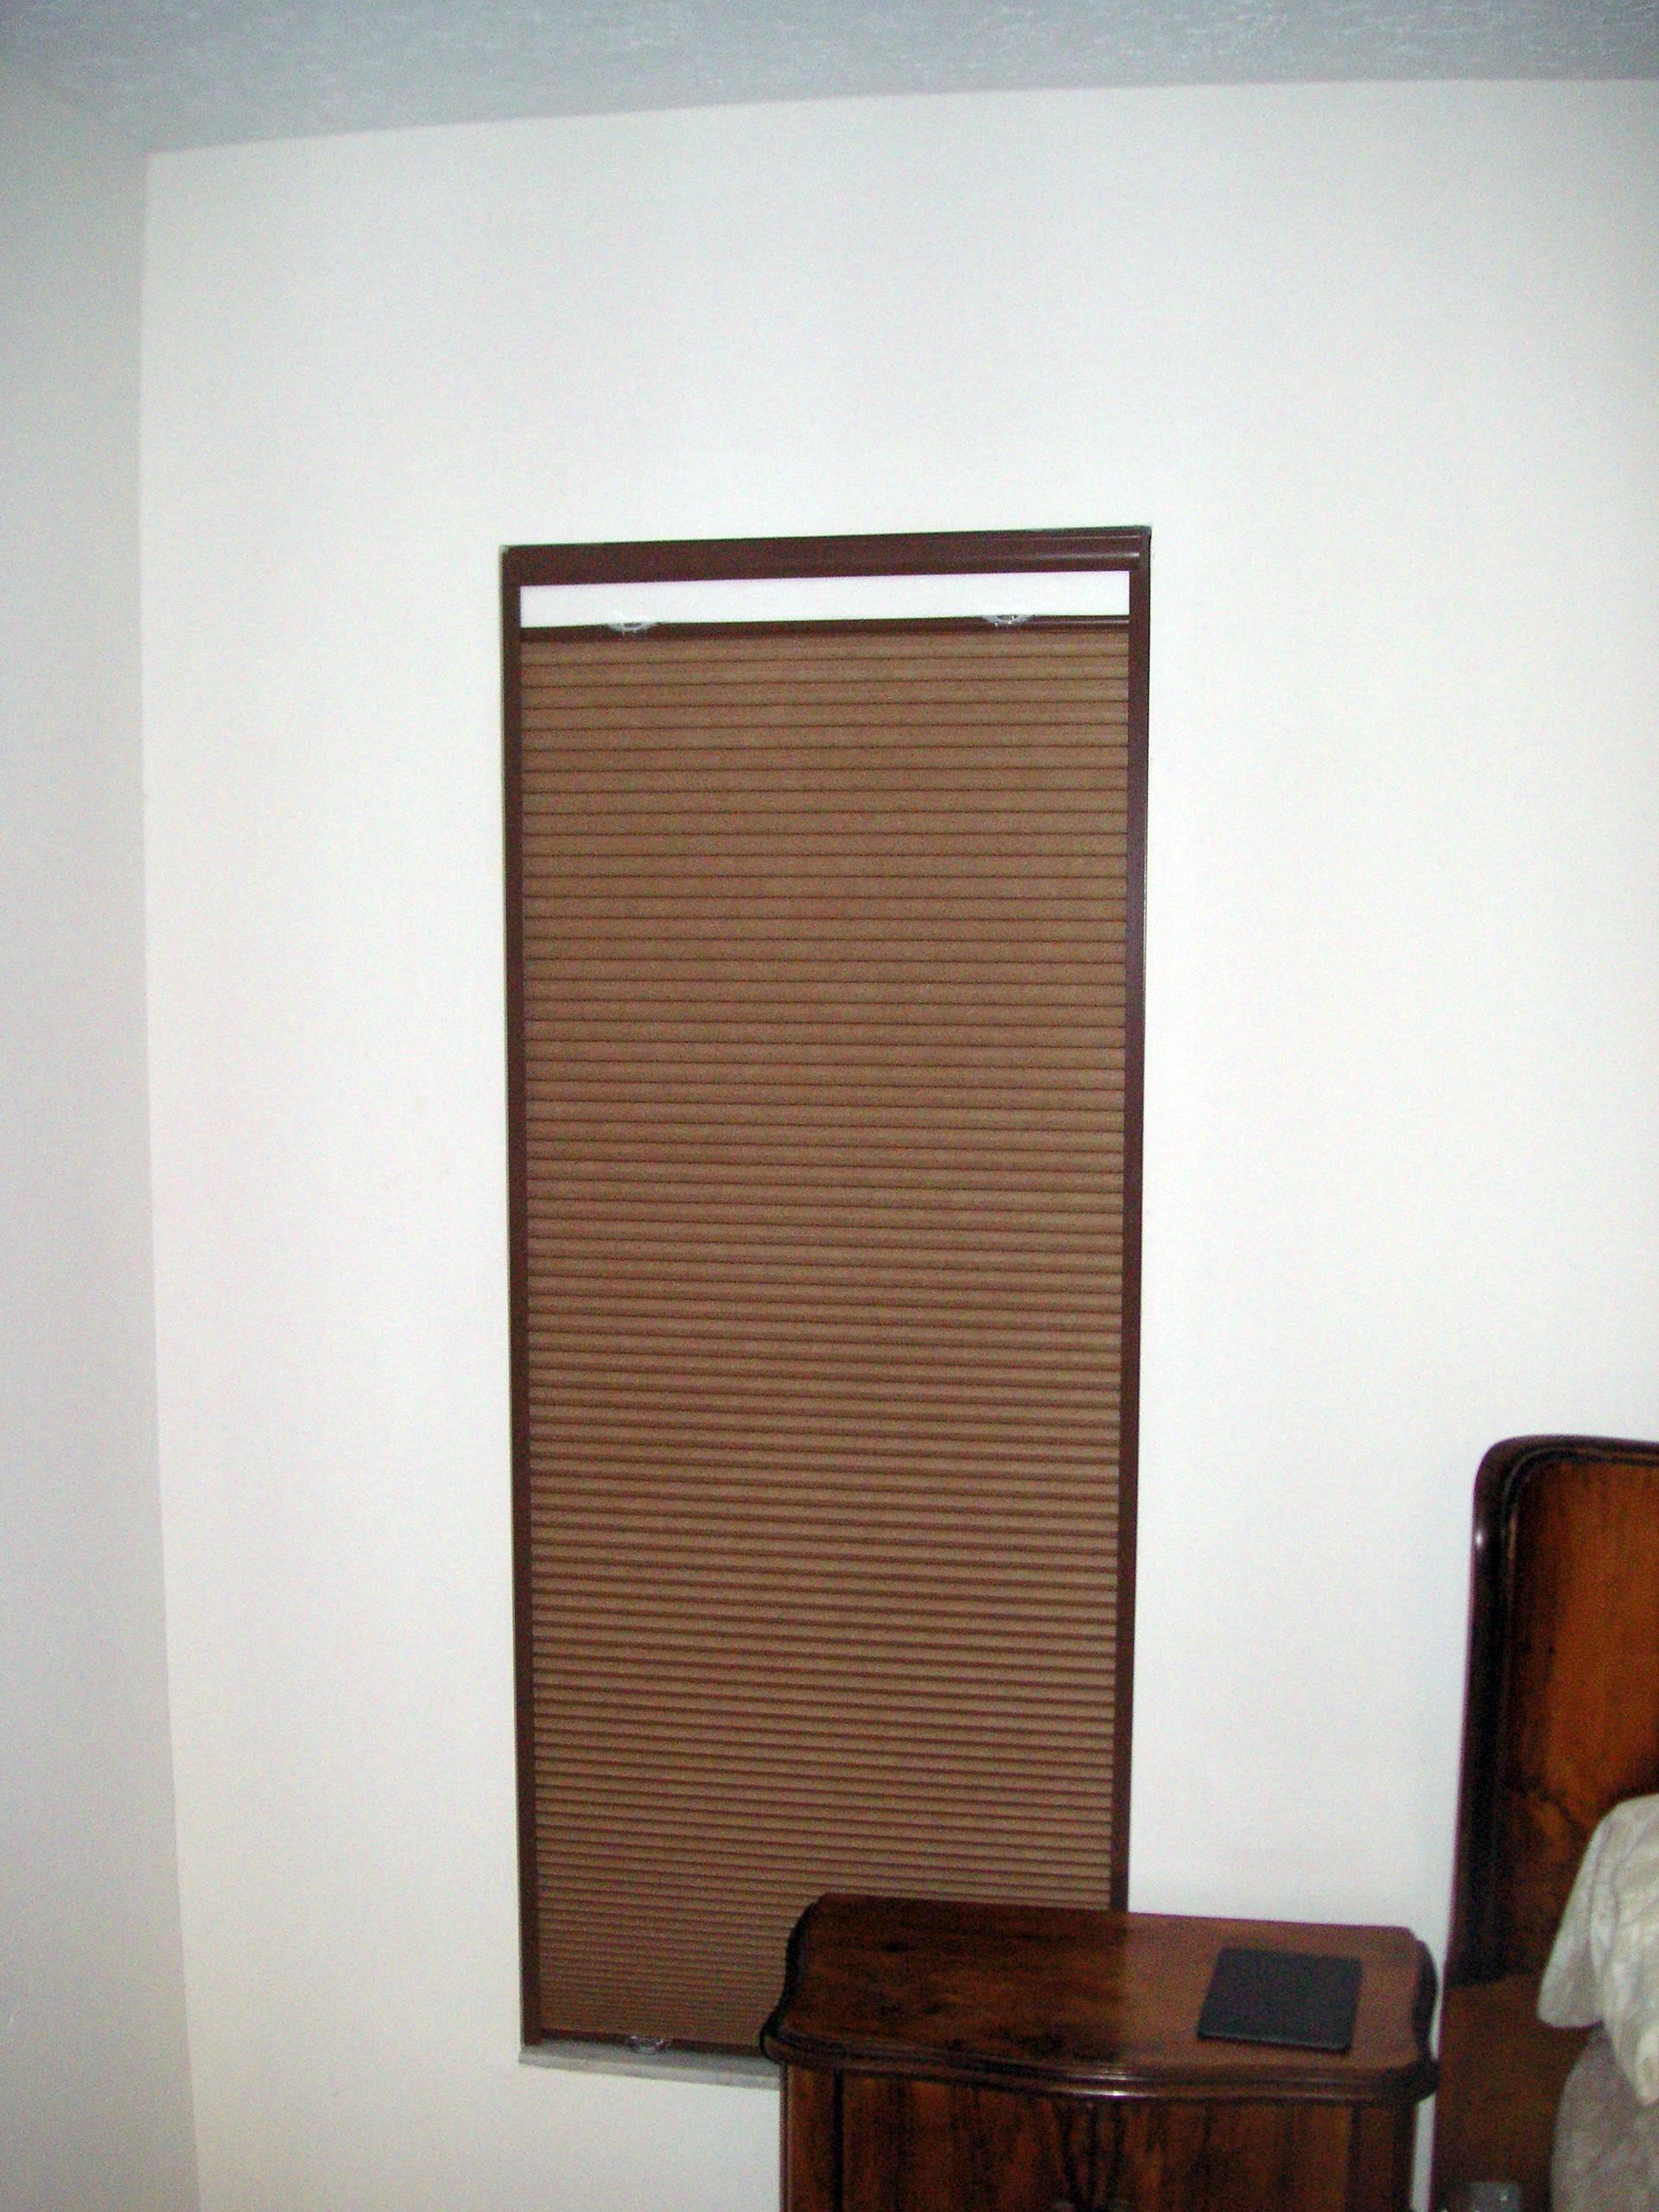 2022-03-12_Bali-blinds-review_08